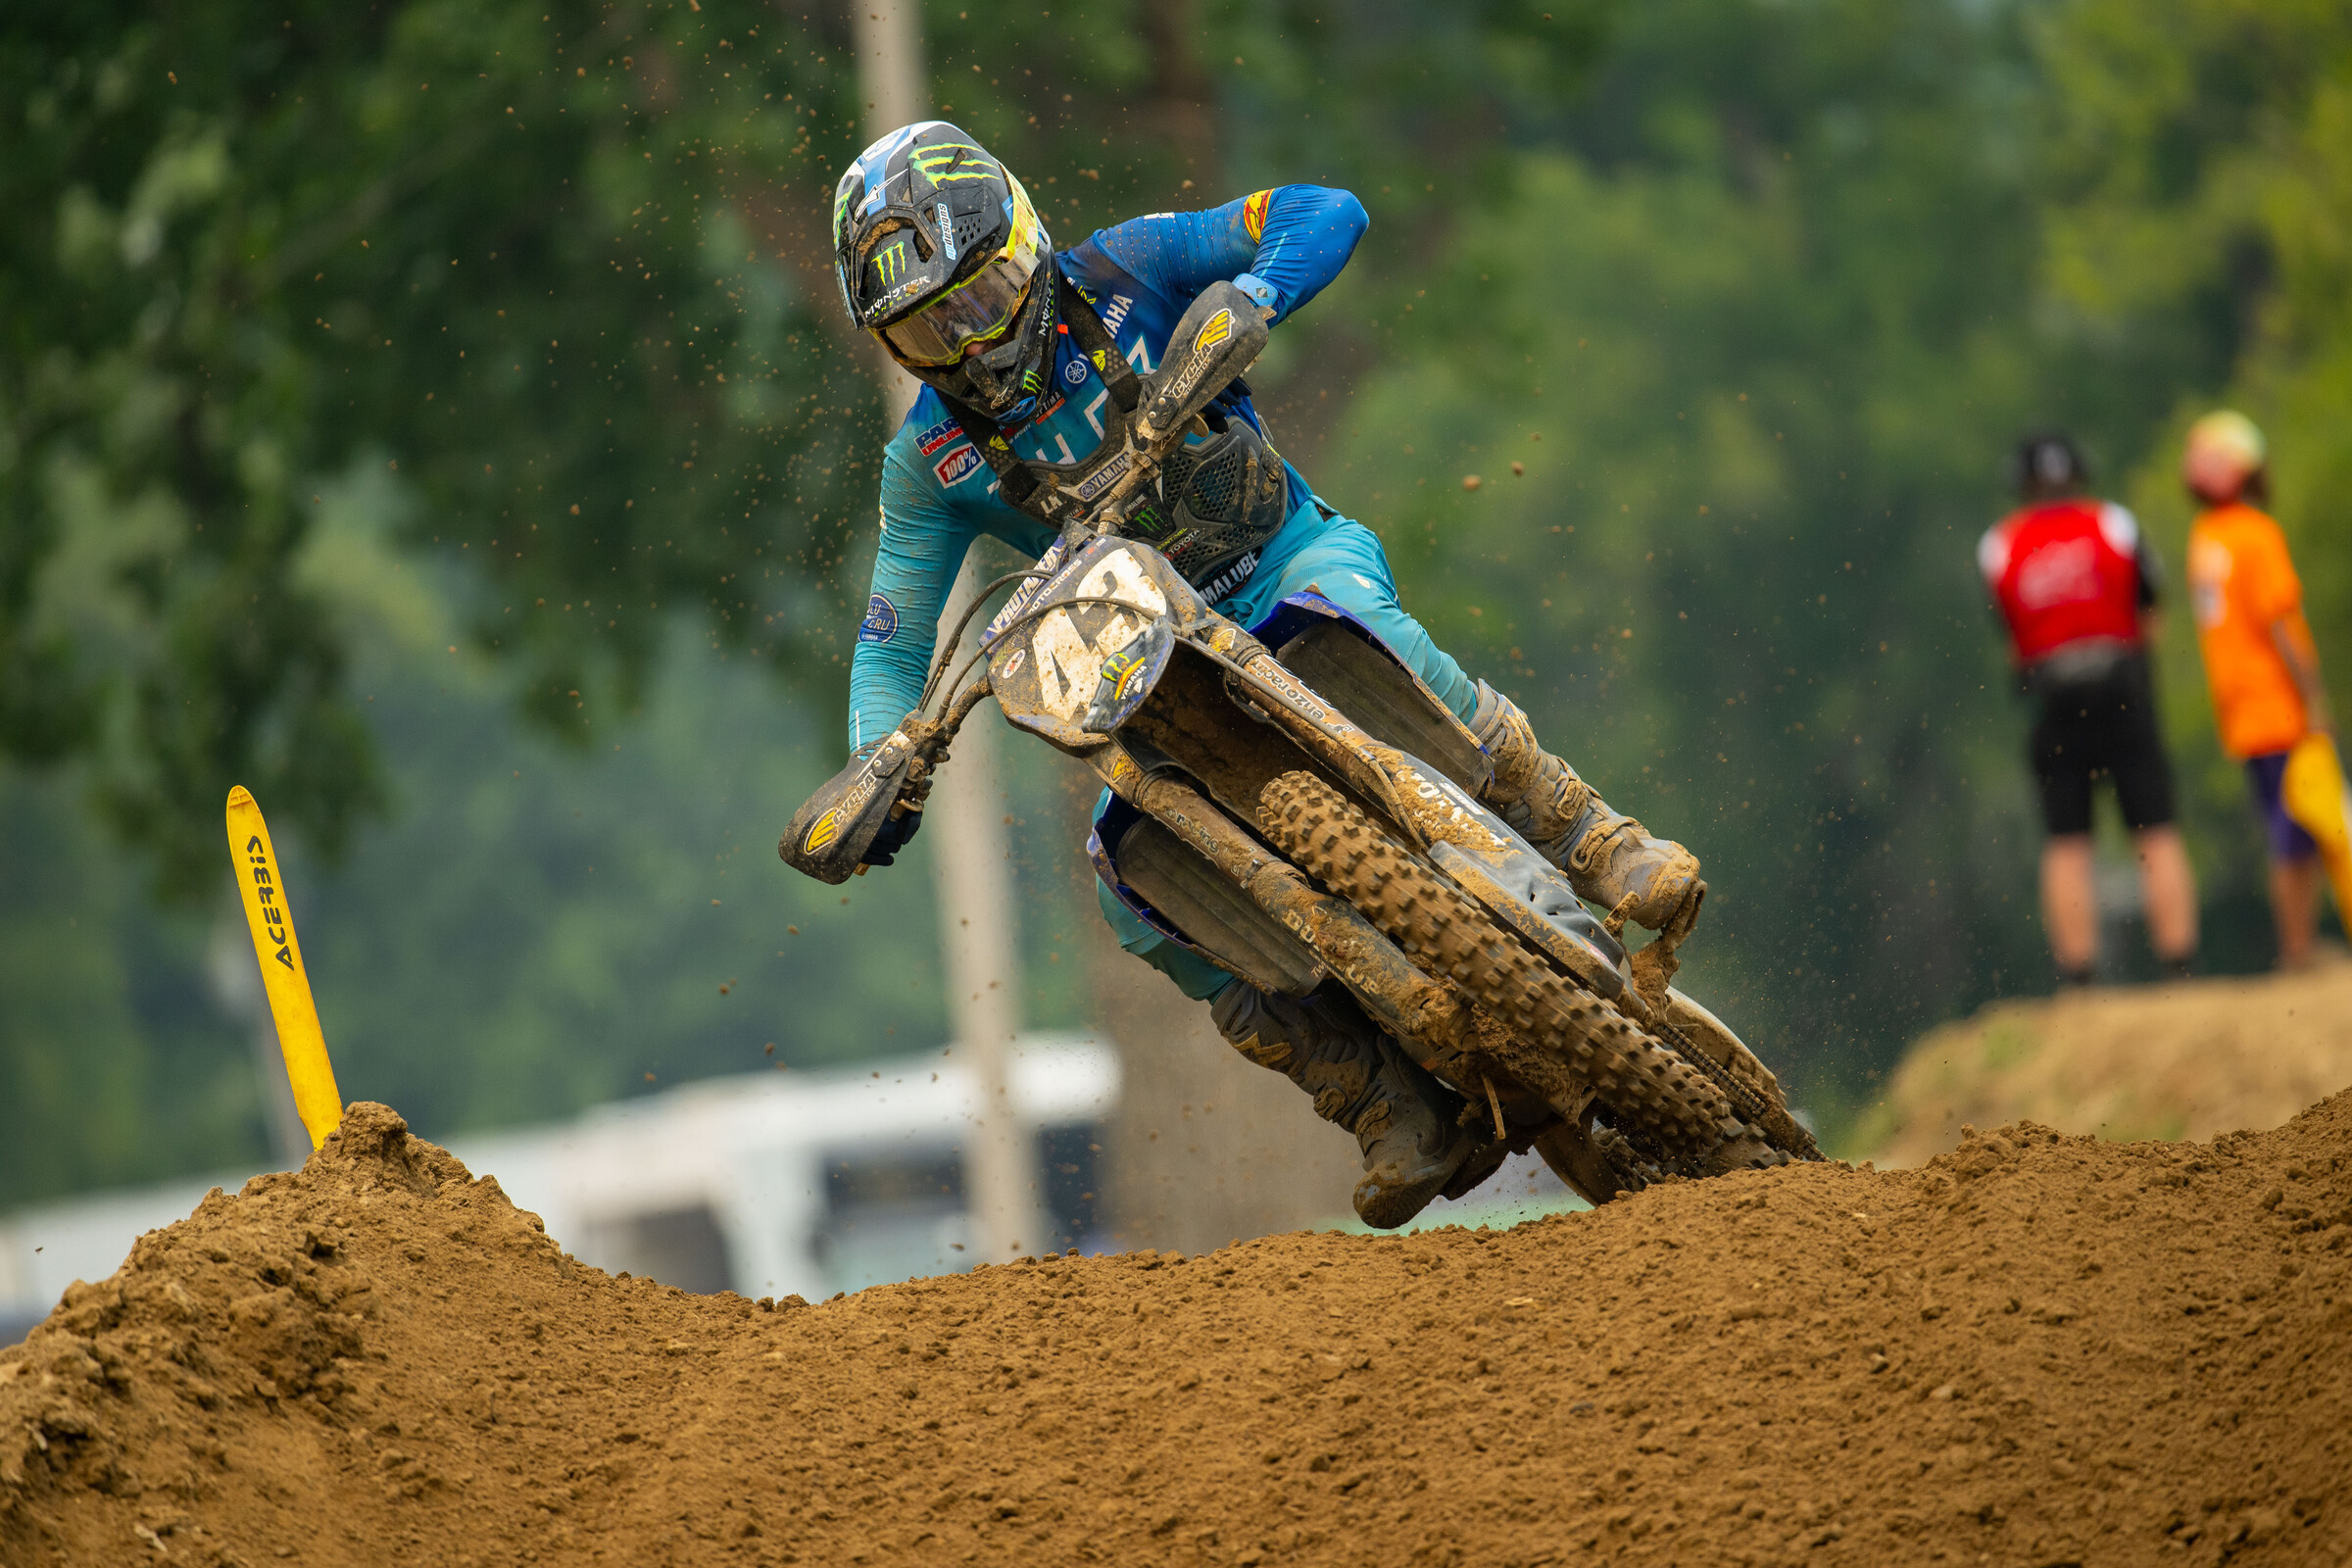 How to Watch/Stream 2023 Washougal National and MXGP of Flanders on TV